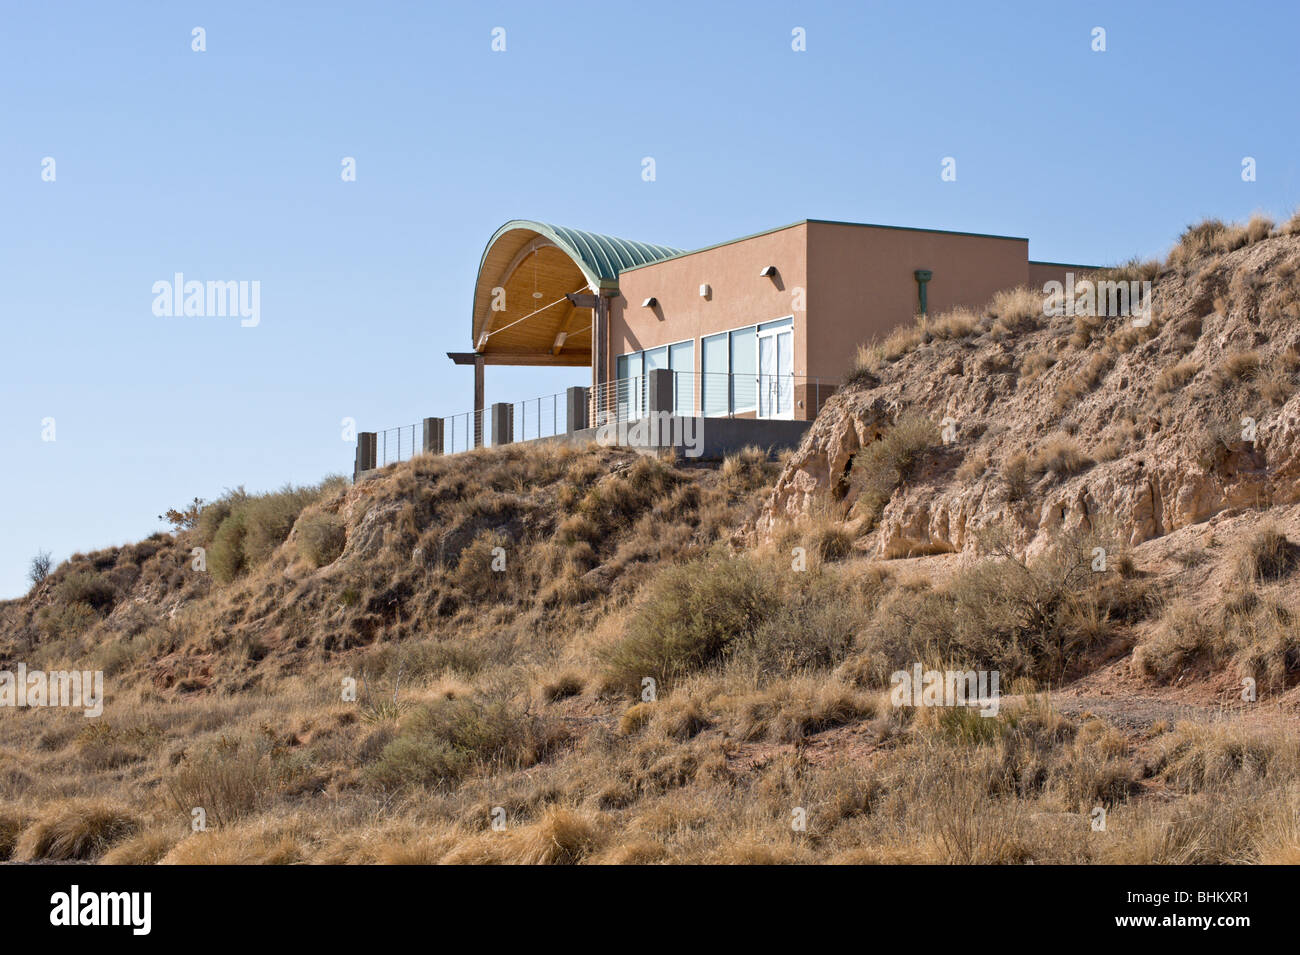 The Joe Skeen Visitor Center sits on a bluff overlooking Bitter Lake National Wildlife Refuge, near Roswell, New Mexico. Stock Photo